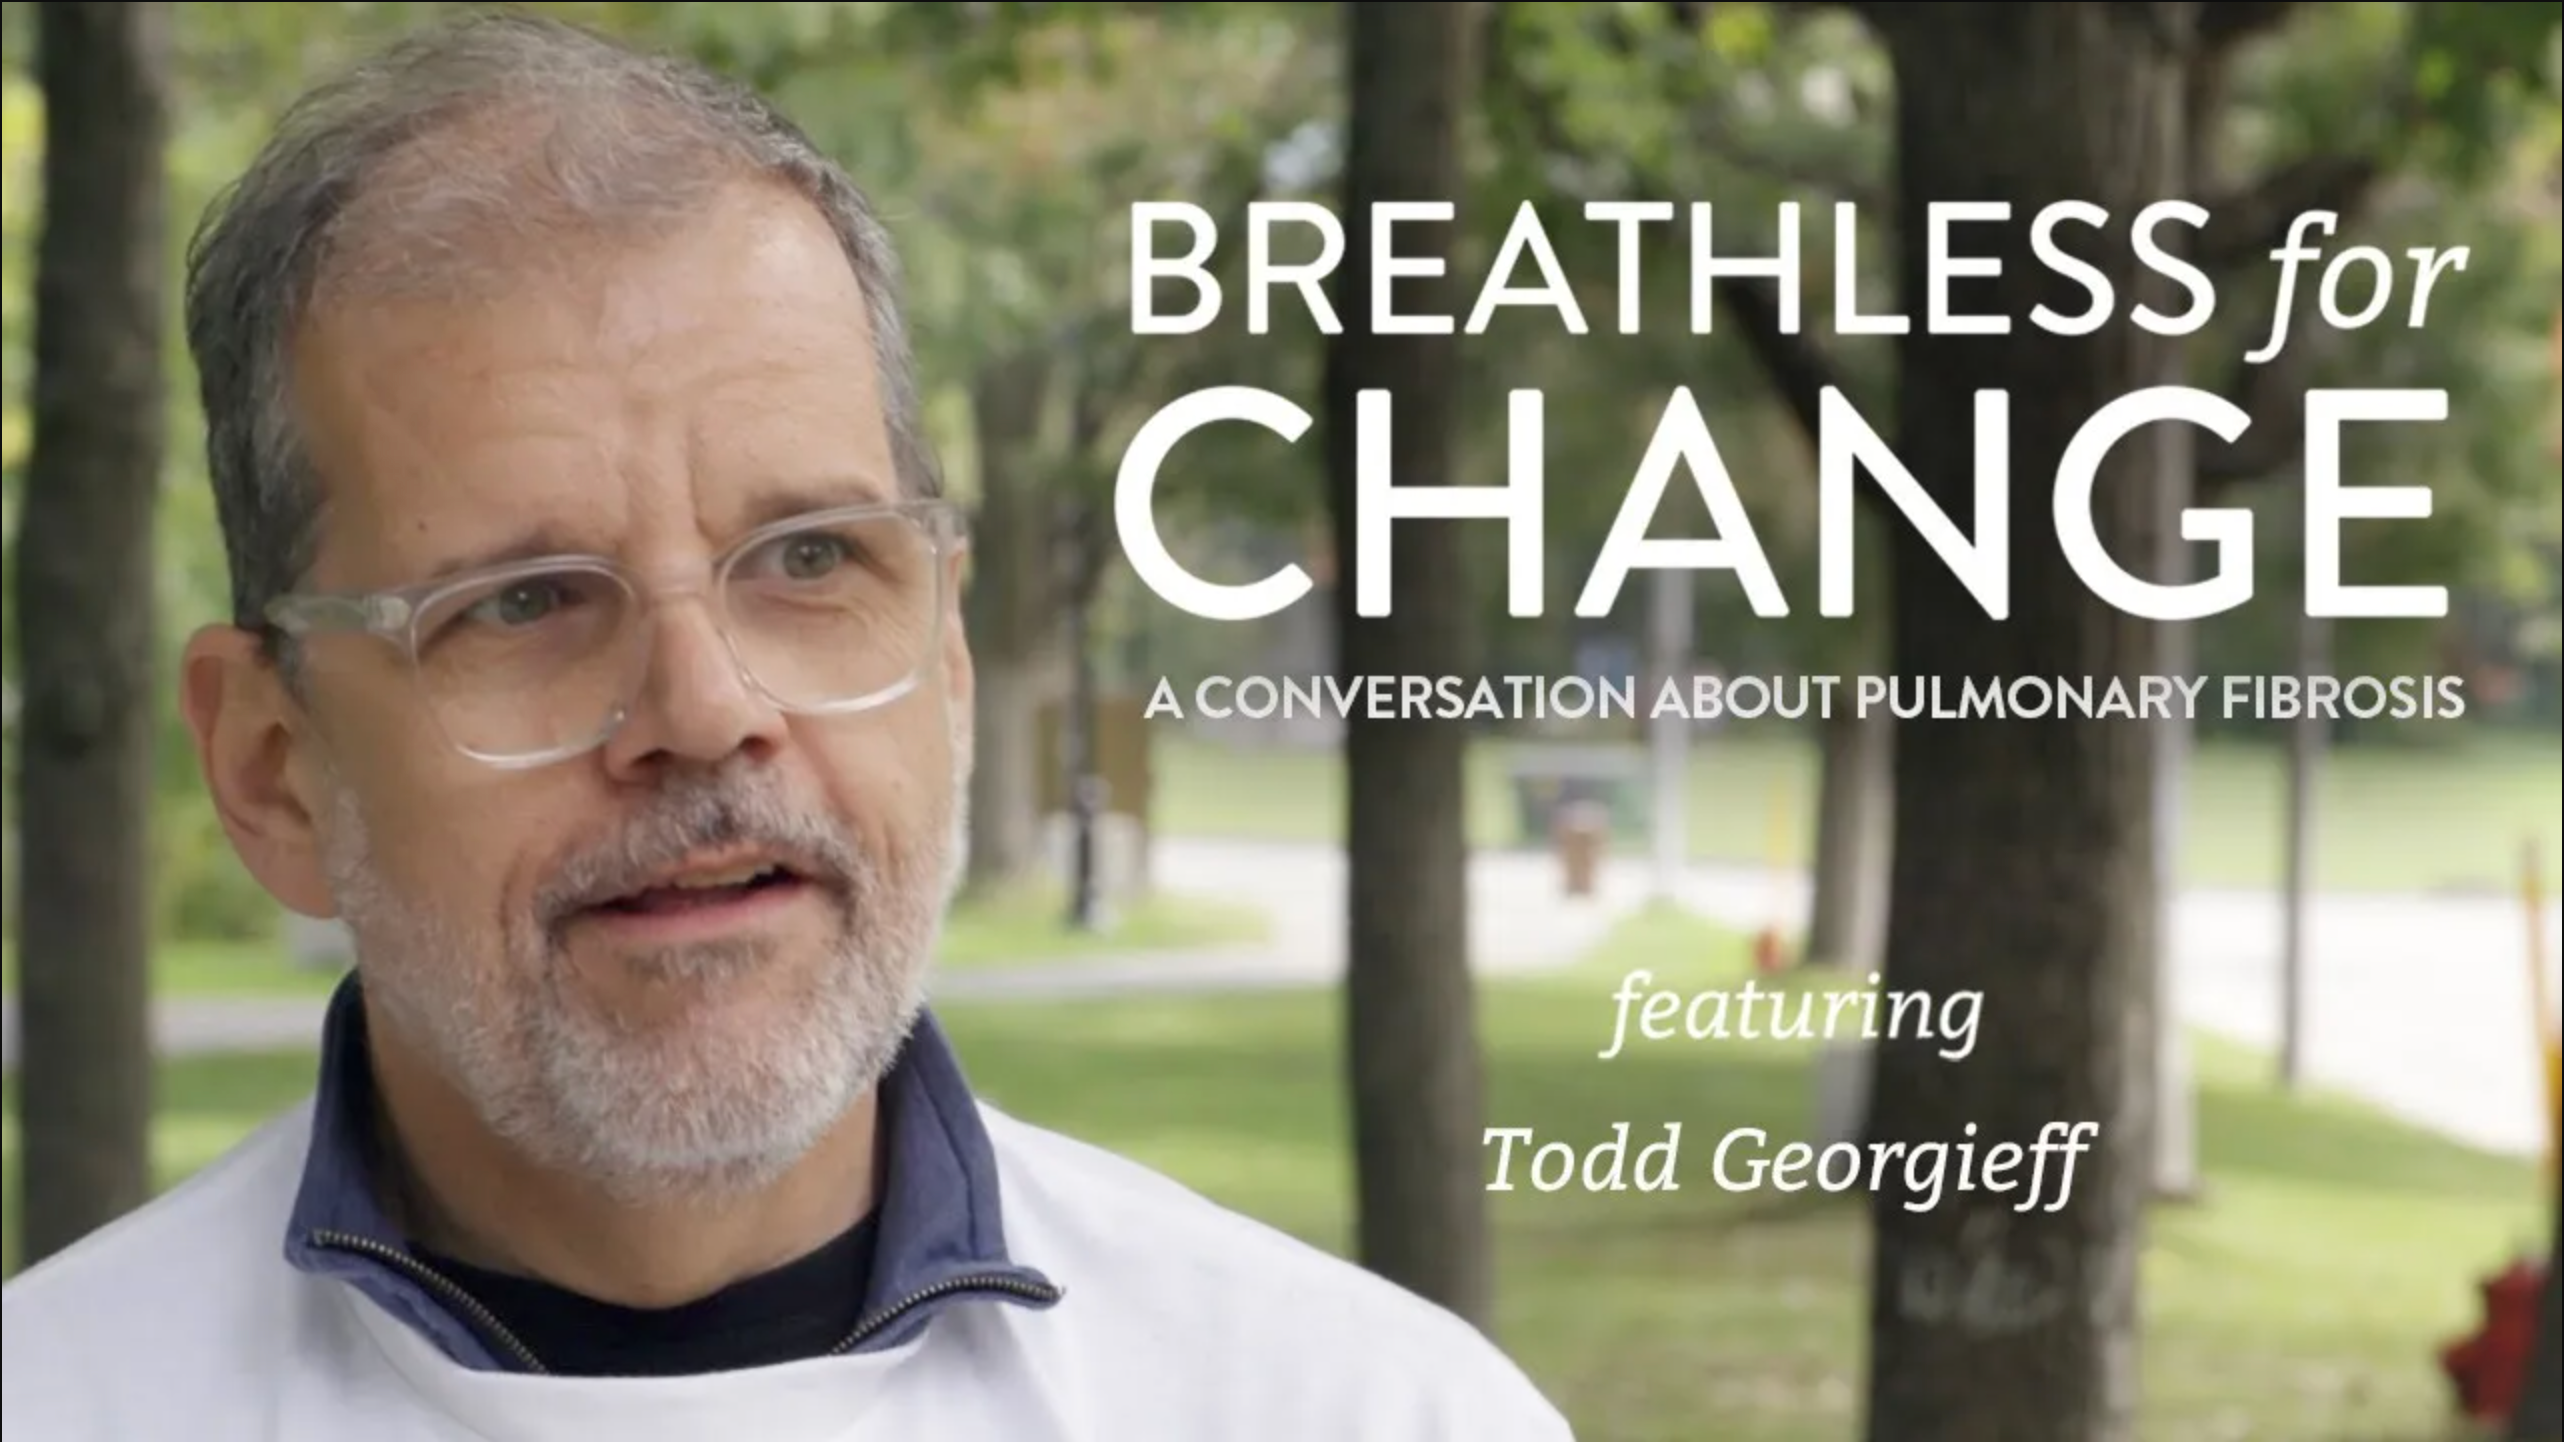 Man among trees with text: "BREATHLESS for CHANGE: A CONVERSATION ABOUT PULMONARY FIBROSIS featuring Todd Georgieff"